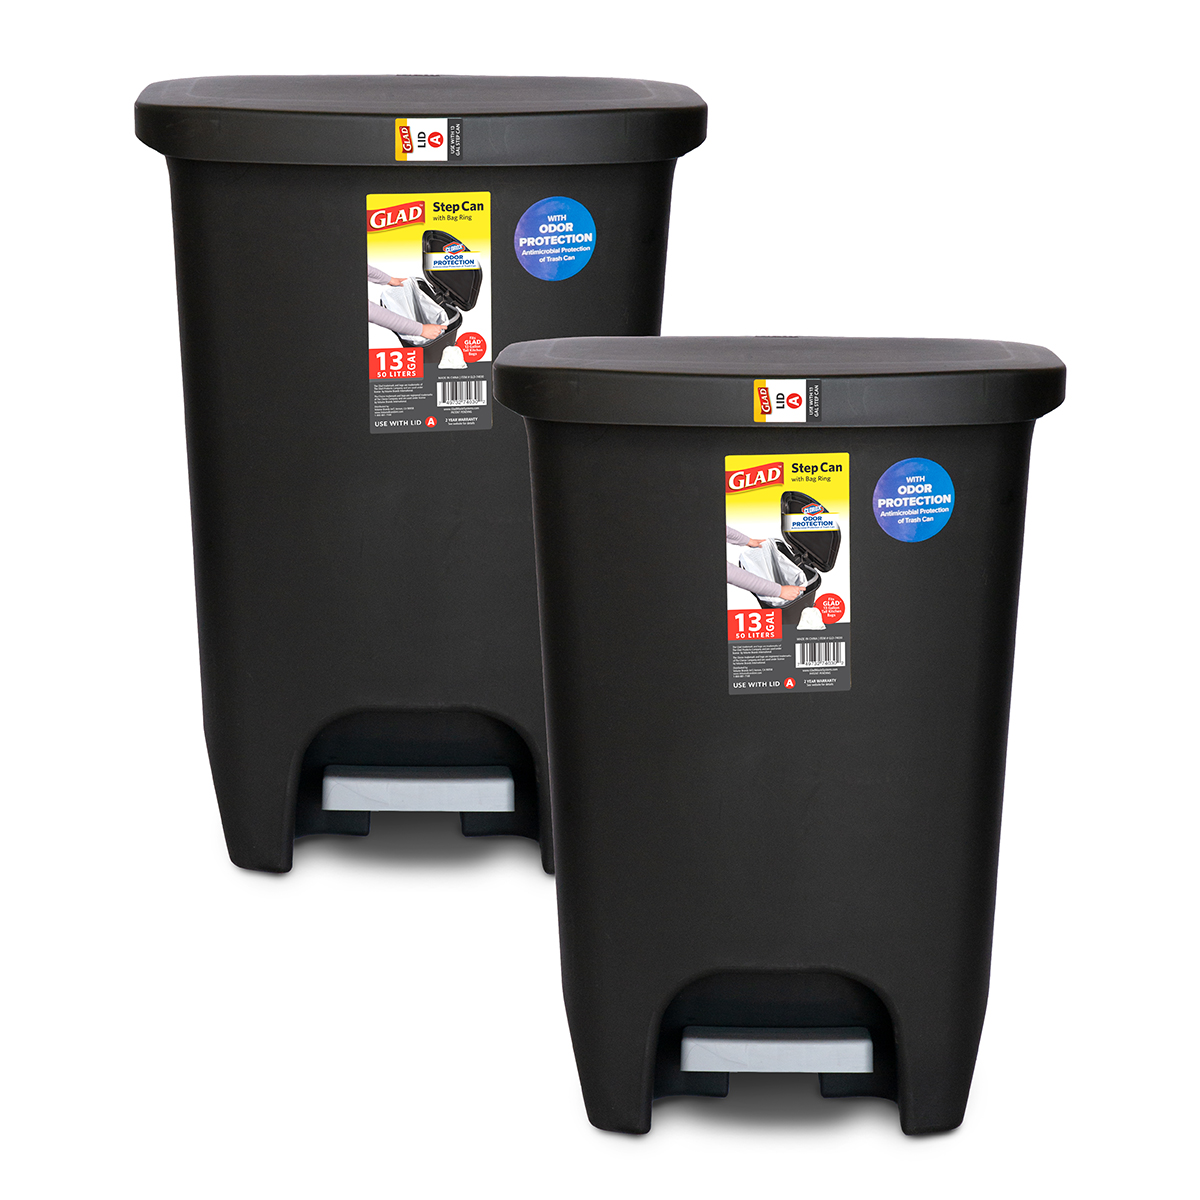 2-Pack of 13-Gallon Glad Plastic Step Trash Can (Gray or Black) $26